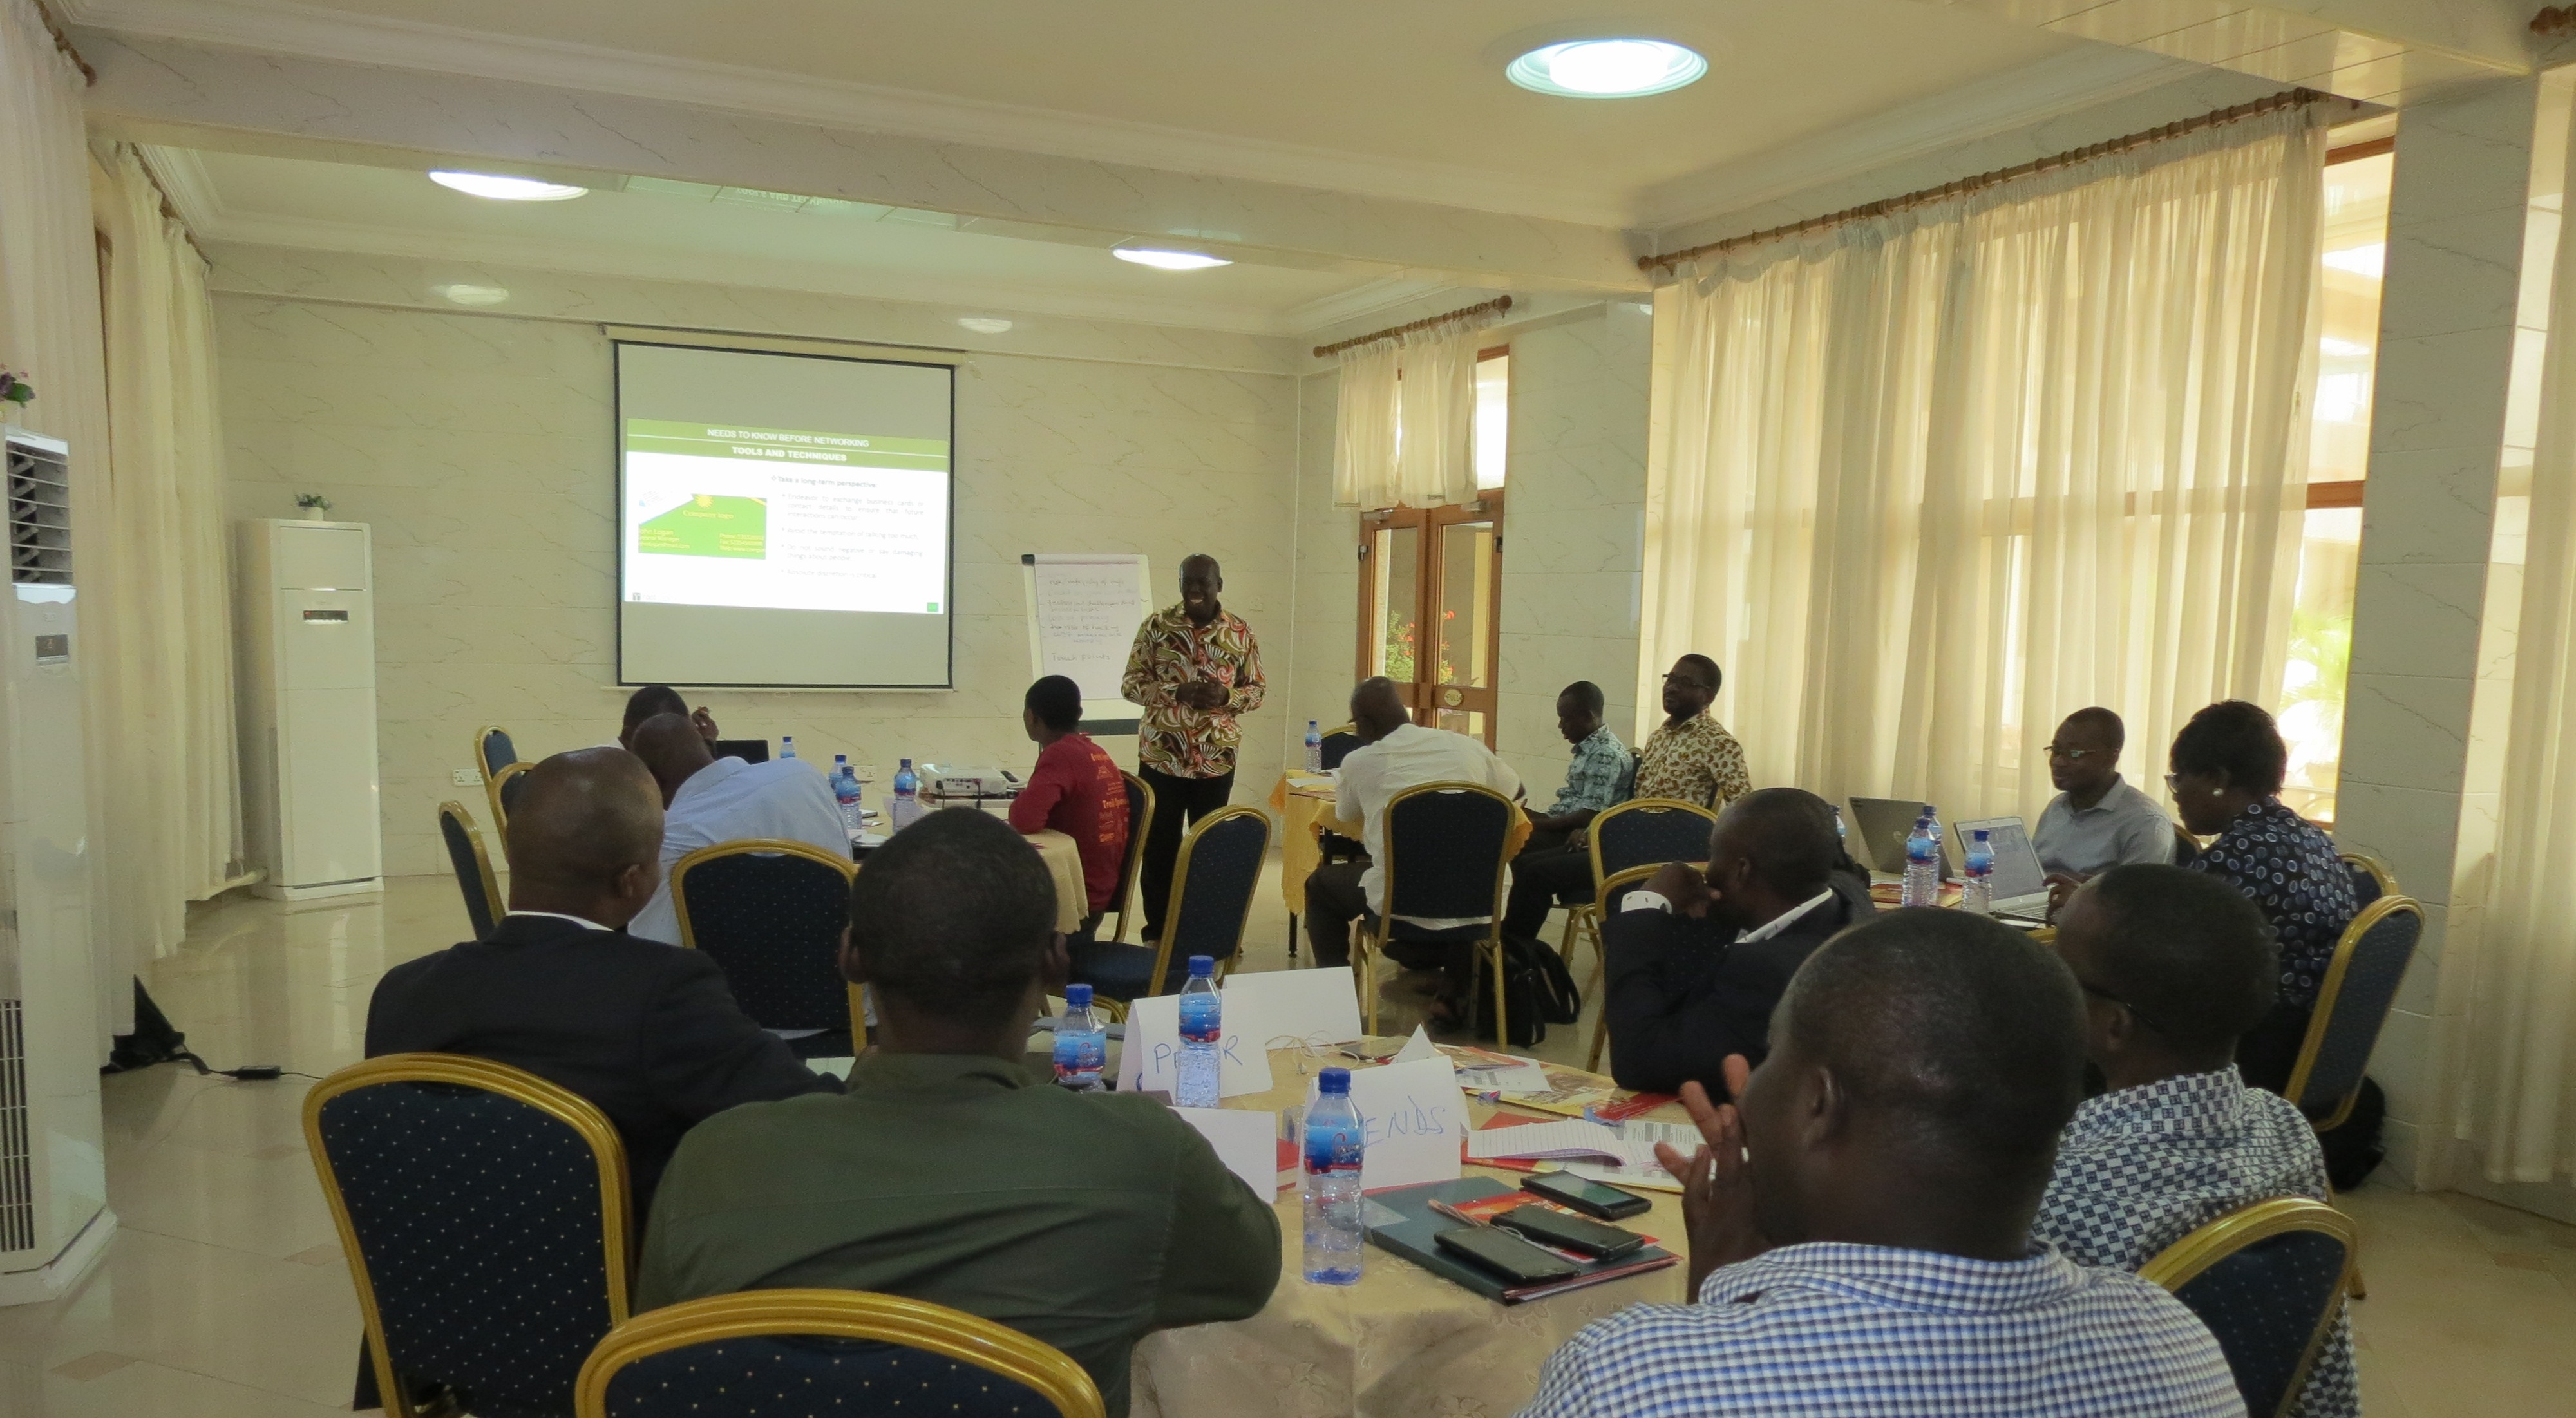 Human-centered design at work among agricultural leaders in West Africa.